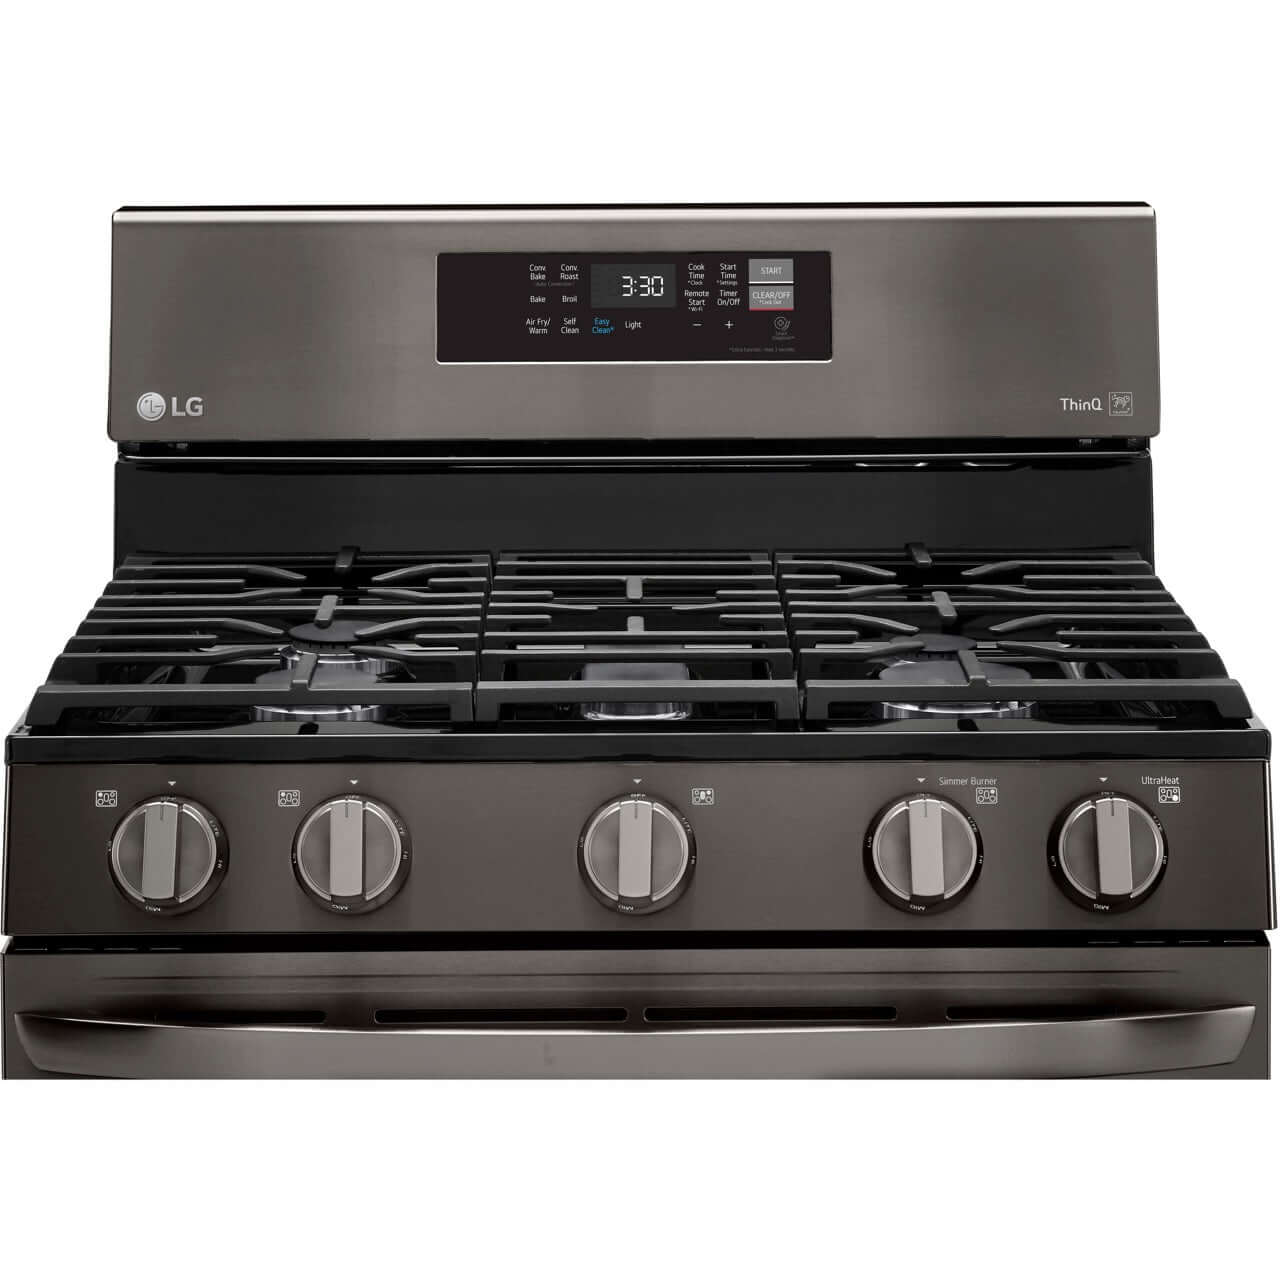 LG 5.8-Cu. Ft. Gas Convection Smart Range with AirFry, Black Stainless Steel (LRGL5823D)